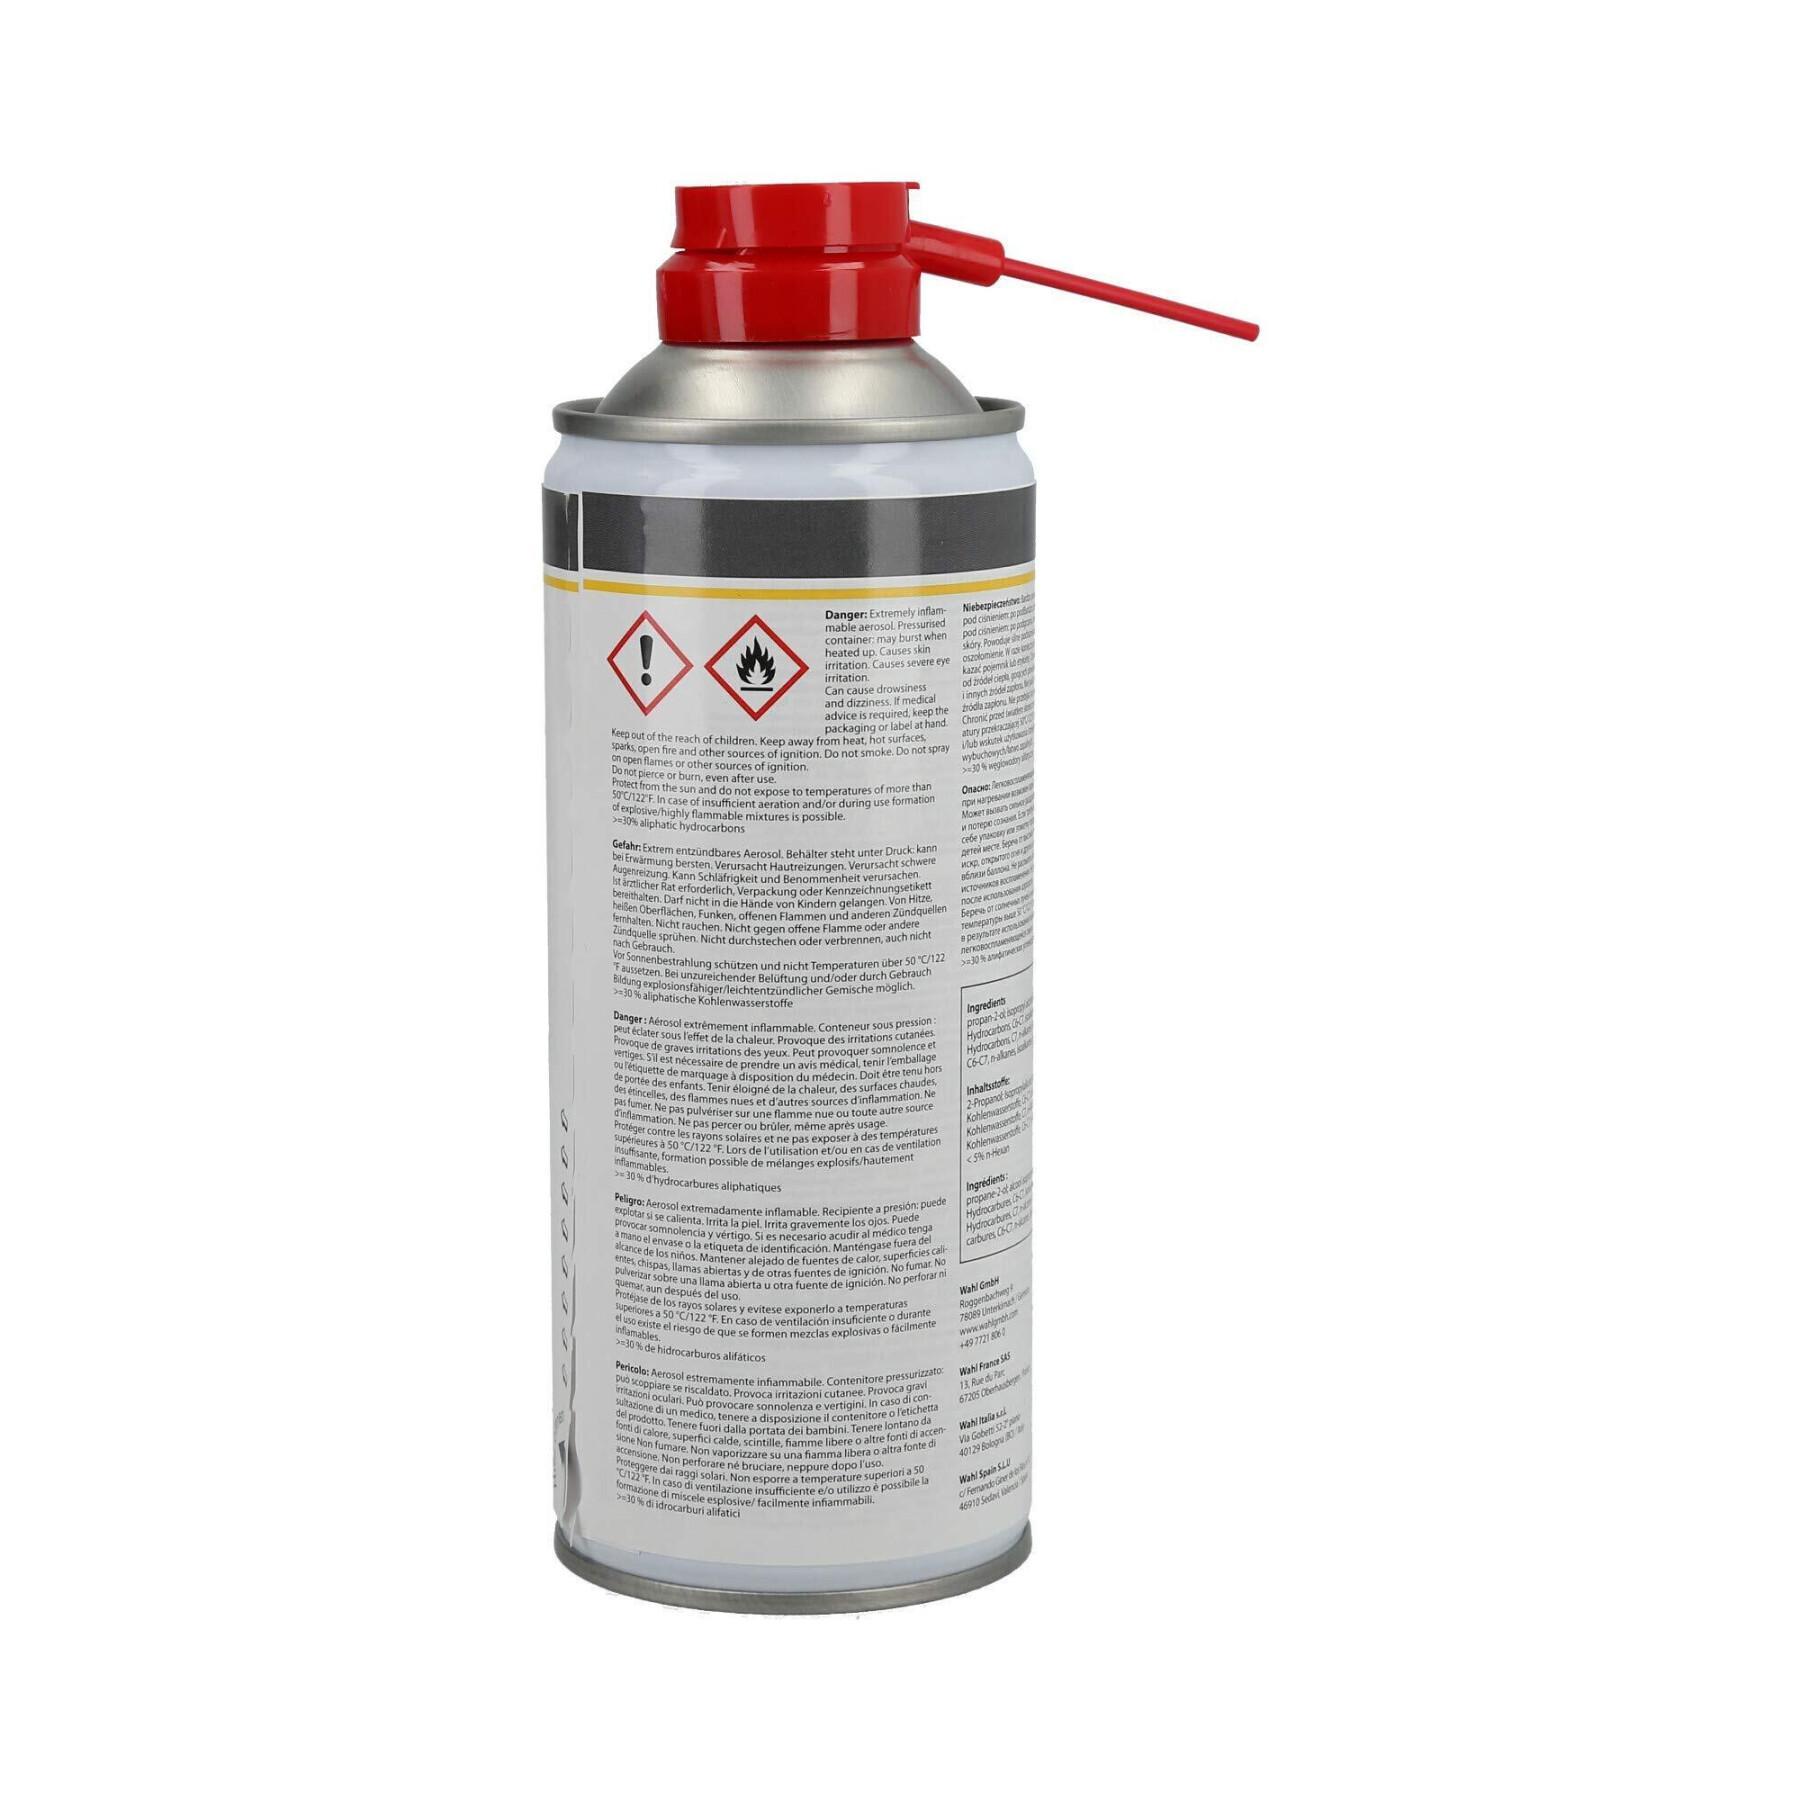 Spray for lawnmowers Wahl Blade